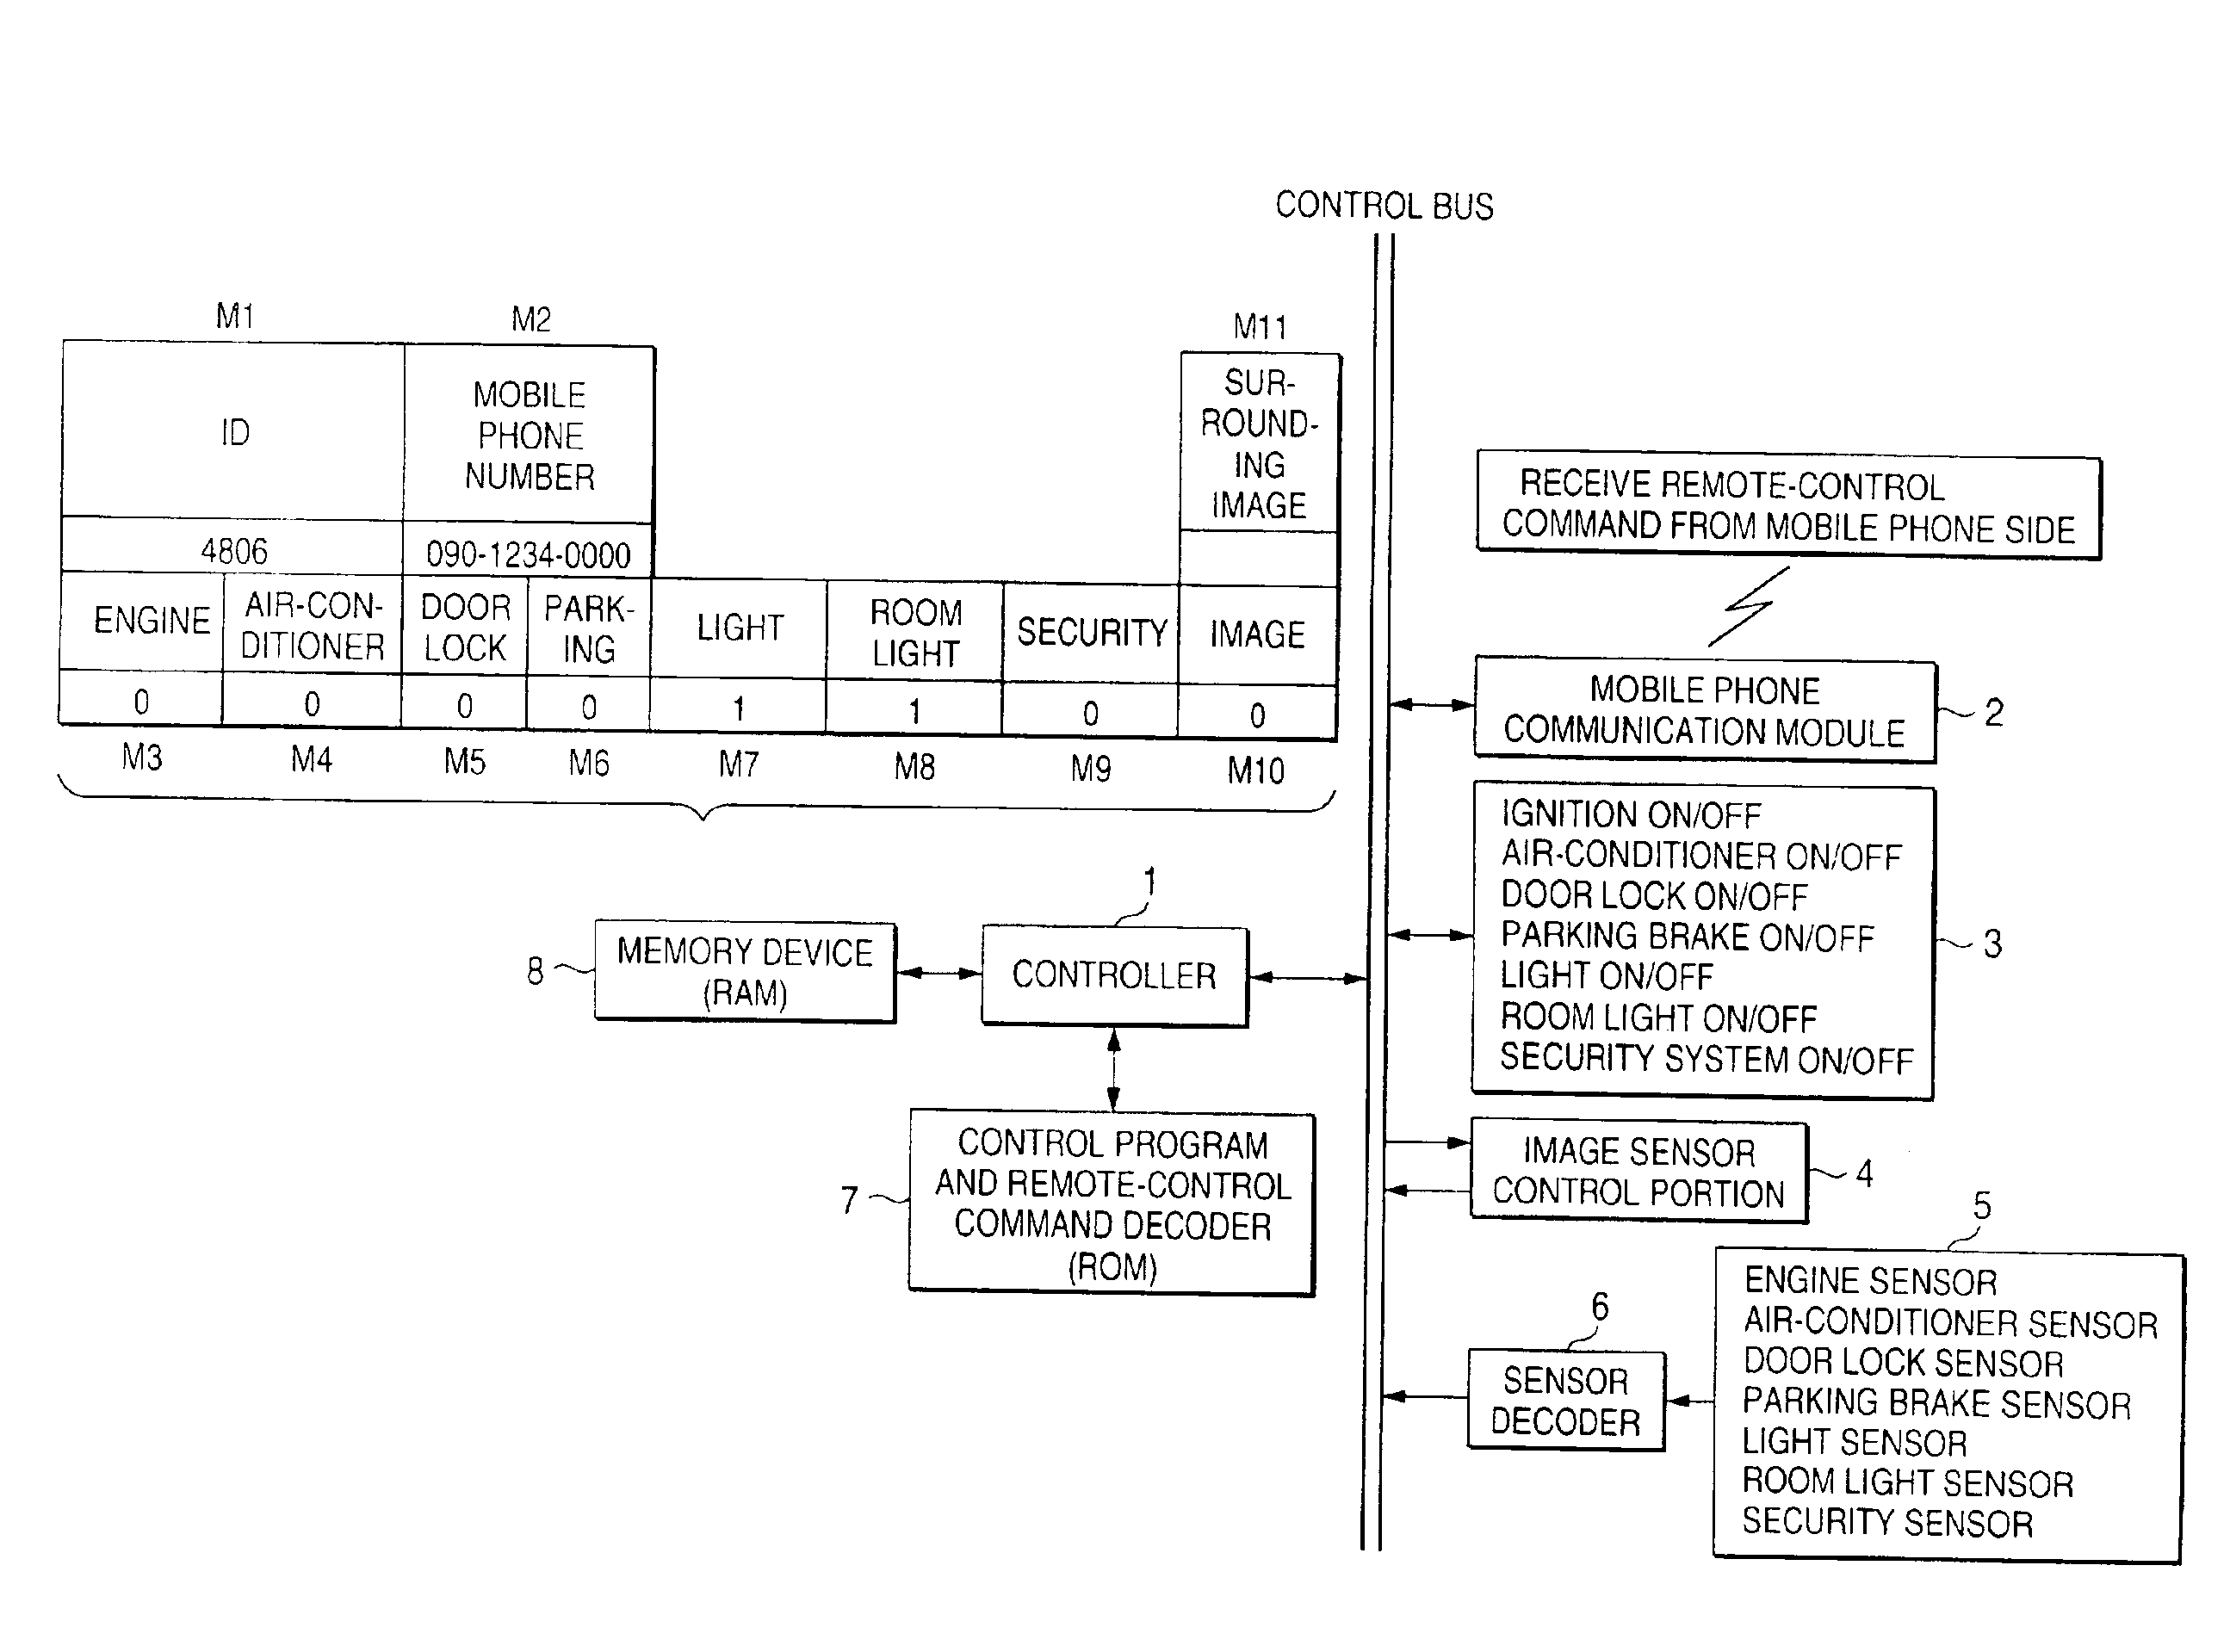 Car control system and vehicle remote control system